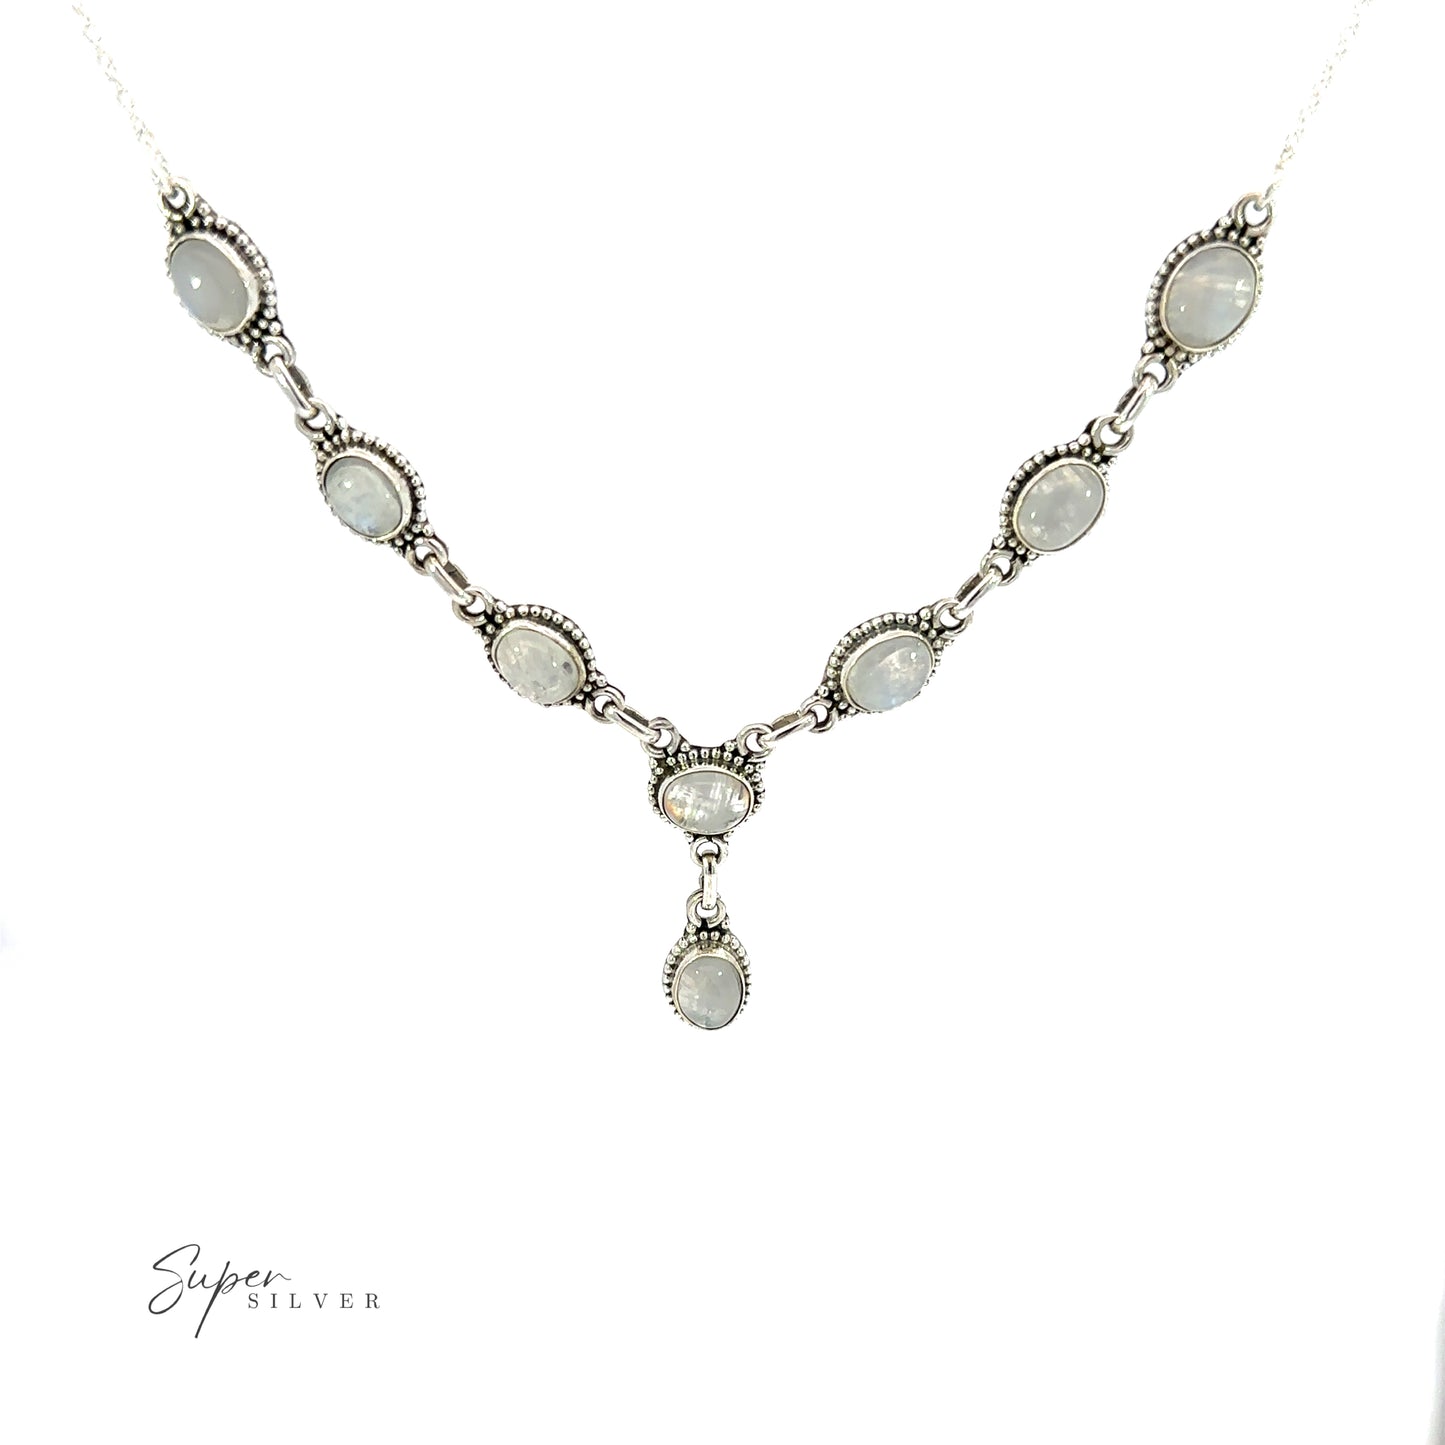 This beautiful Gemstone Y-Necklace with Beaded Border features a stunning Y-shaped design with a moonstone pendant.